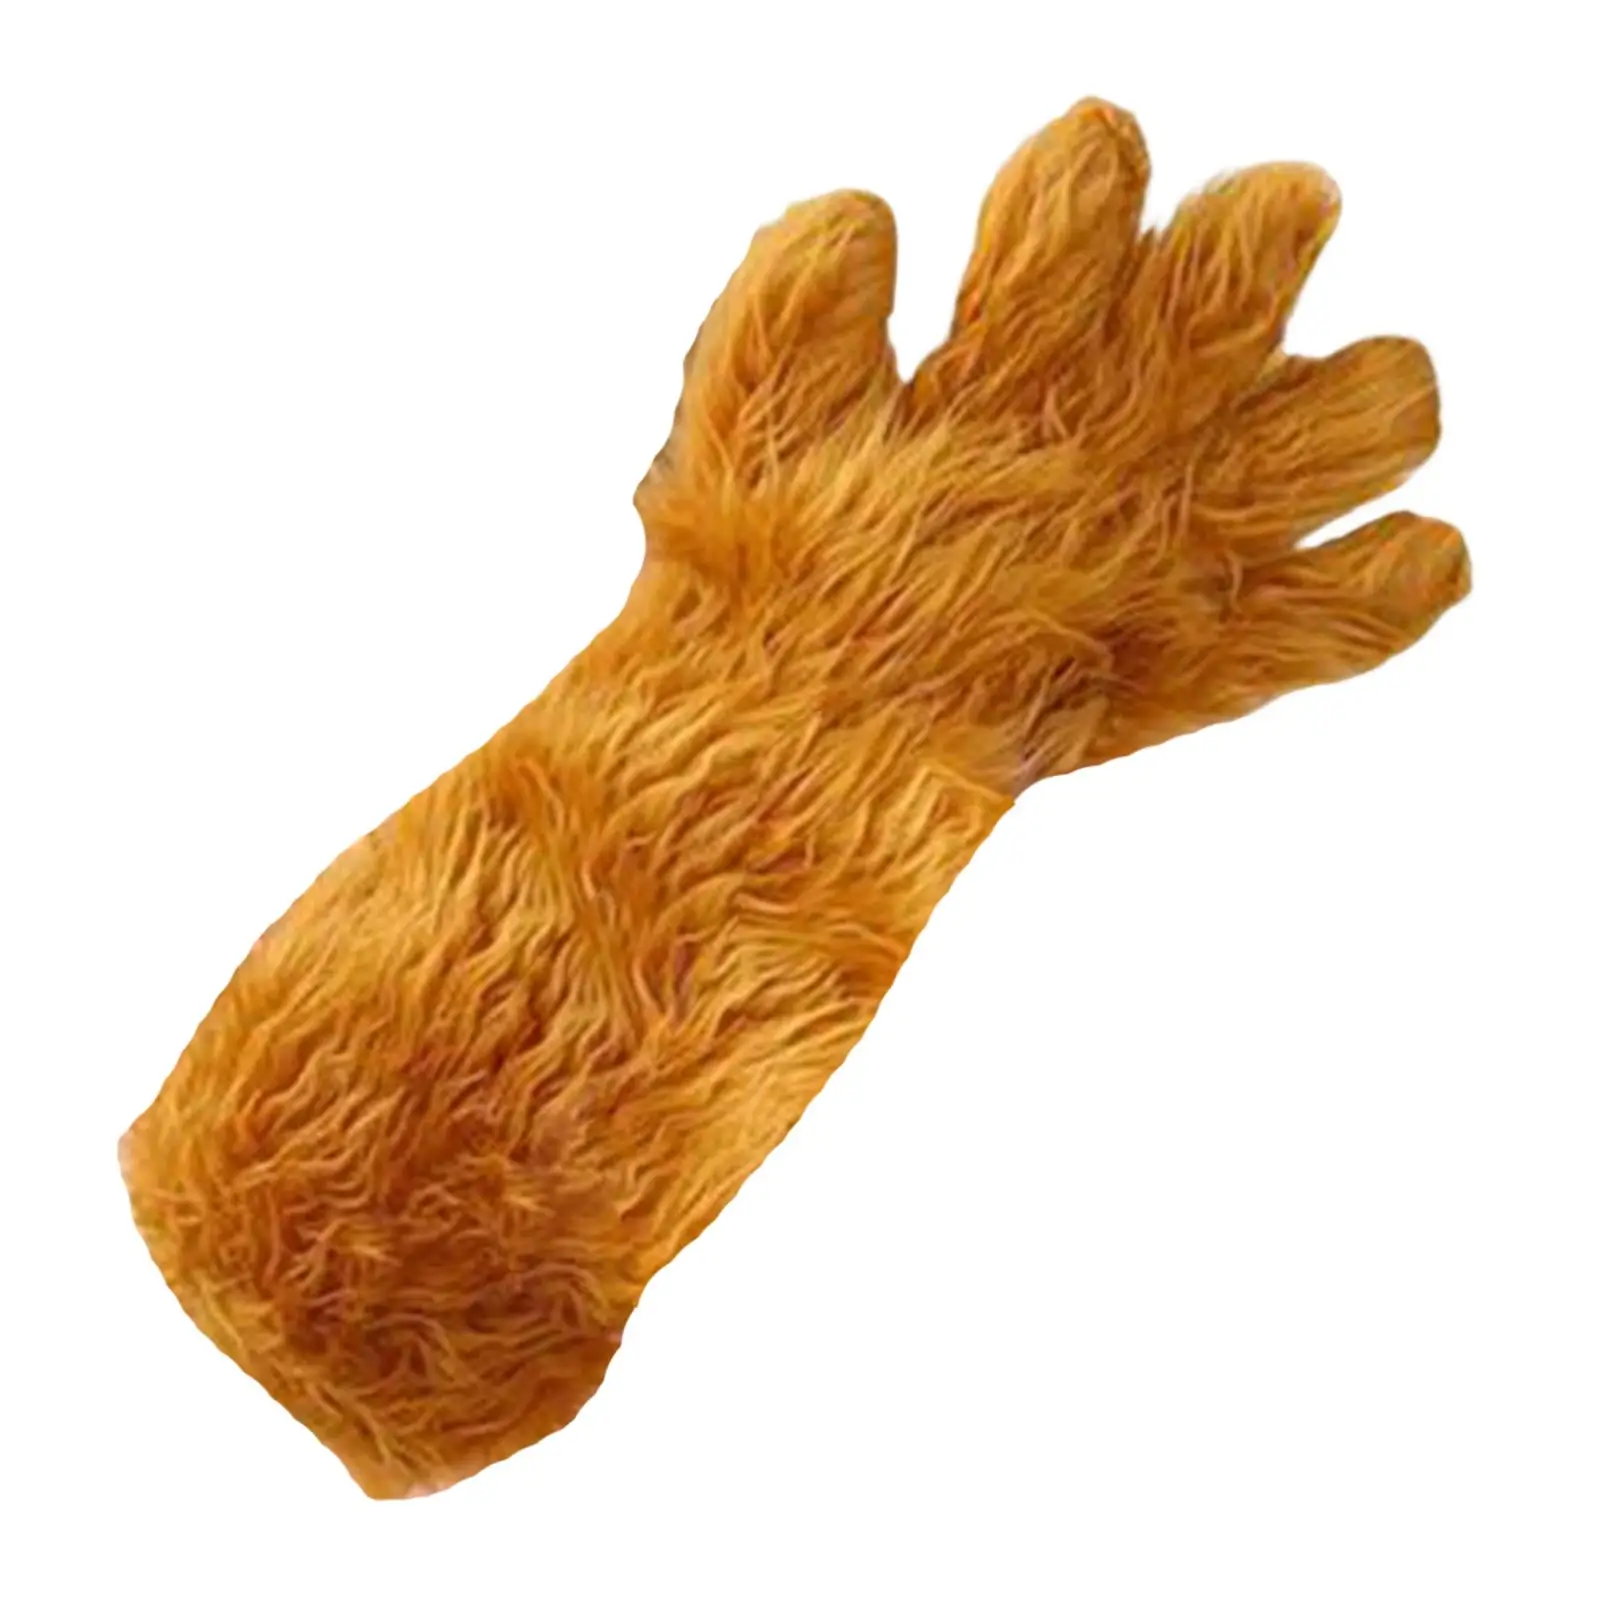 Paw Gloves Costume Dress Adult for Halloween Party Festival Role Play Carnival